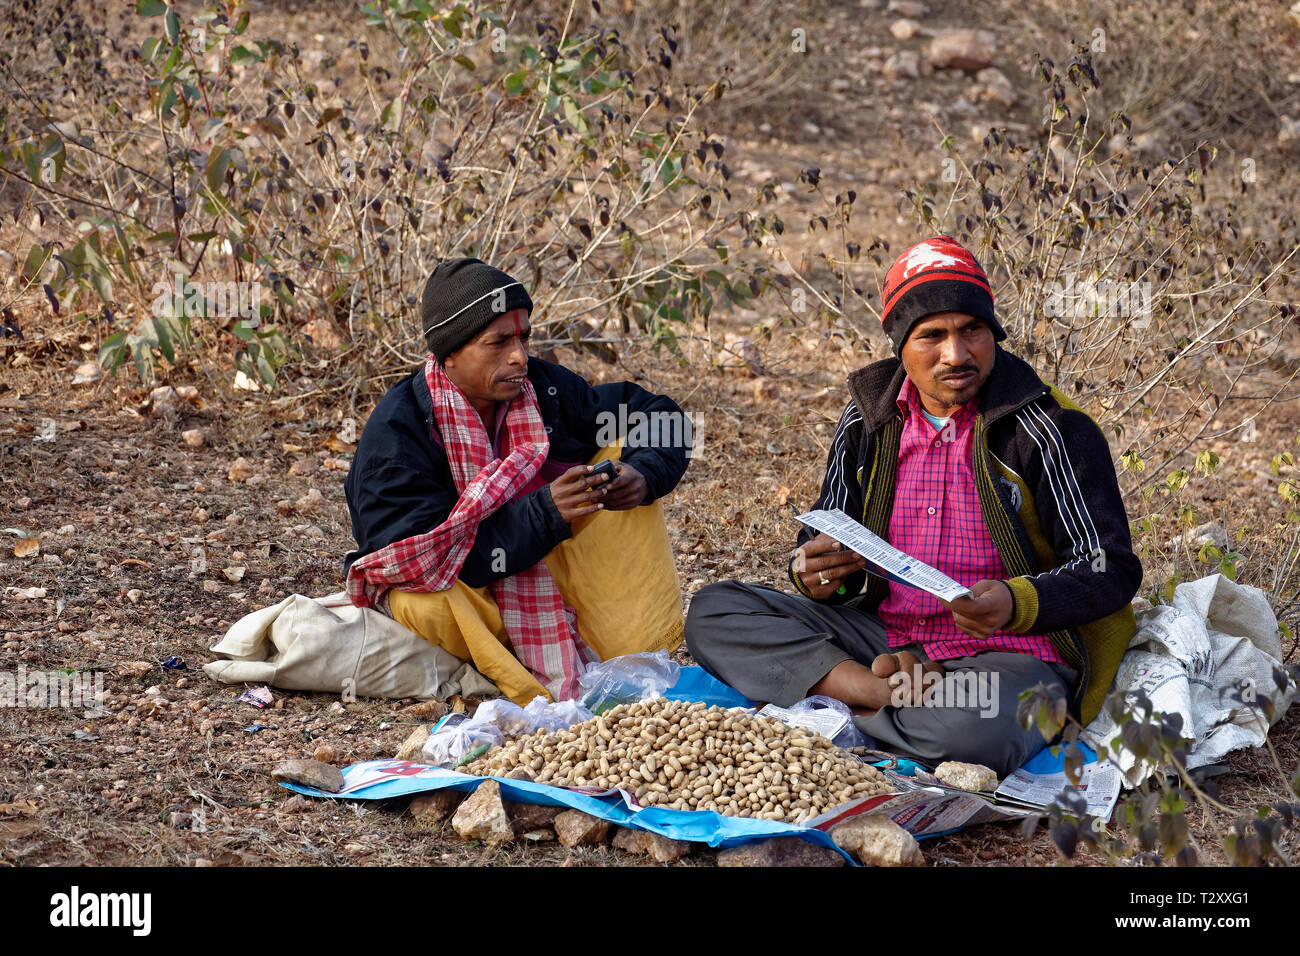 Two men are selling peanuts on a rural fair. Stock Photo